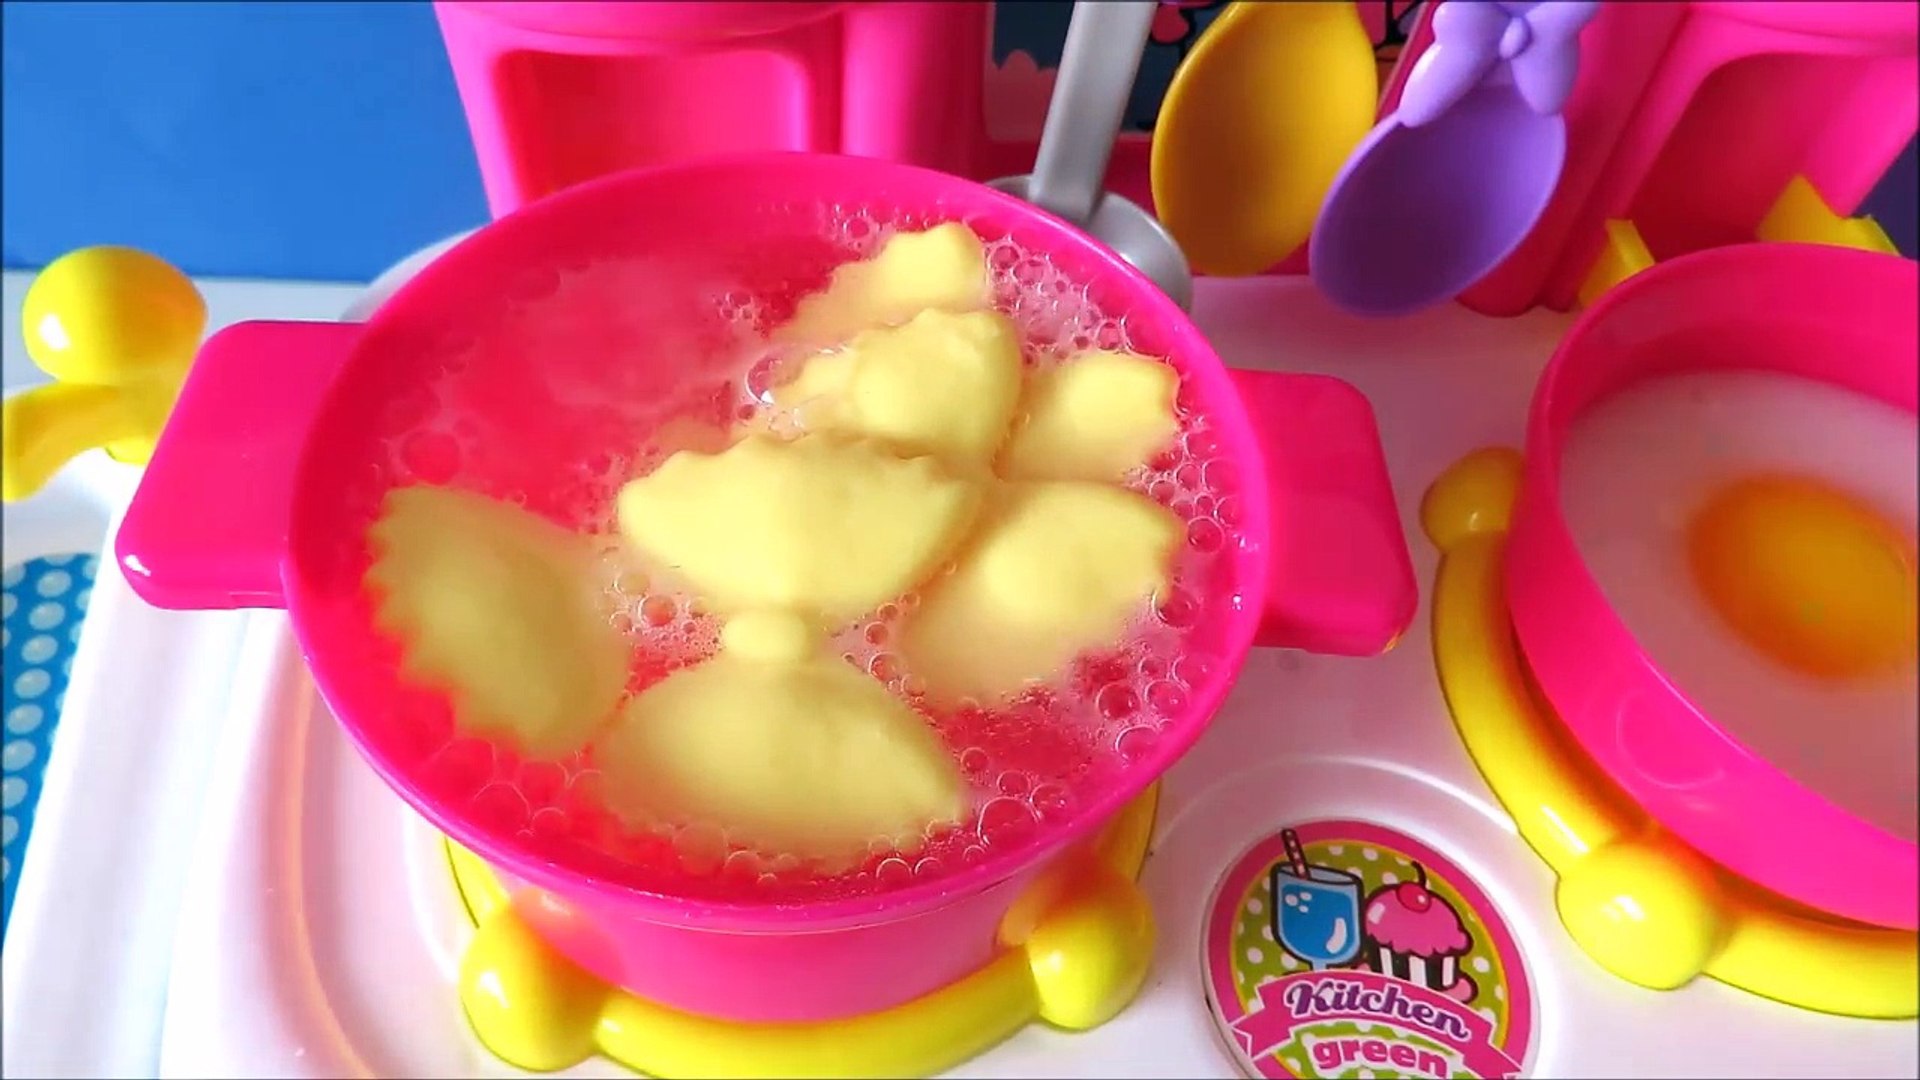 ⁣Toy kitchen cooking baking play-doh bread slime egg velcro cutting vegetables mentos lemonade